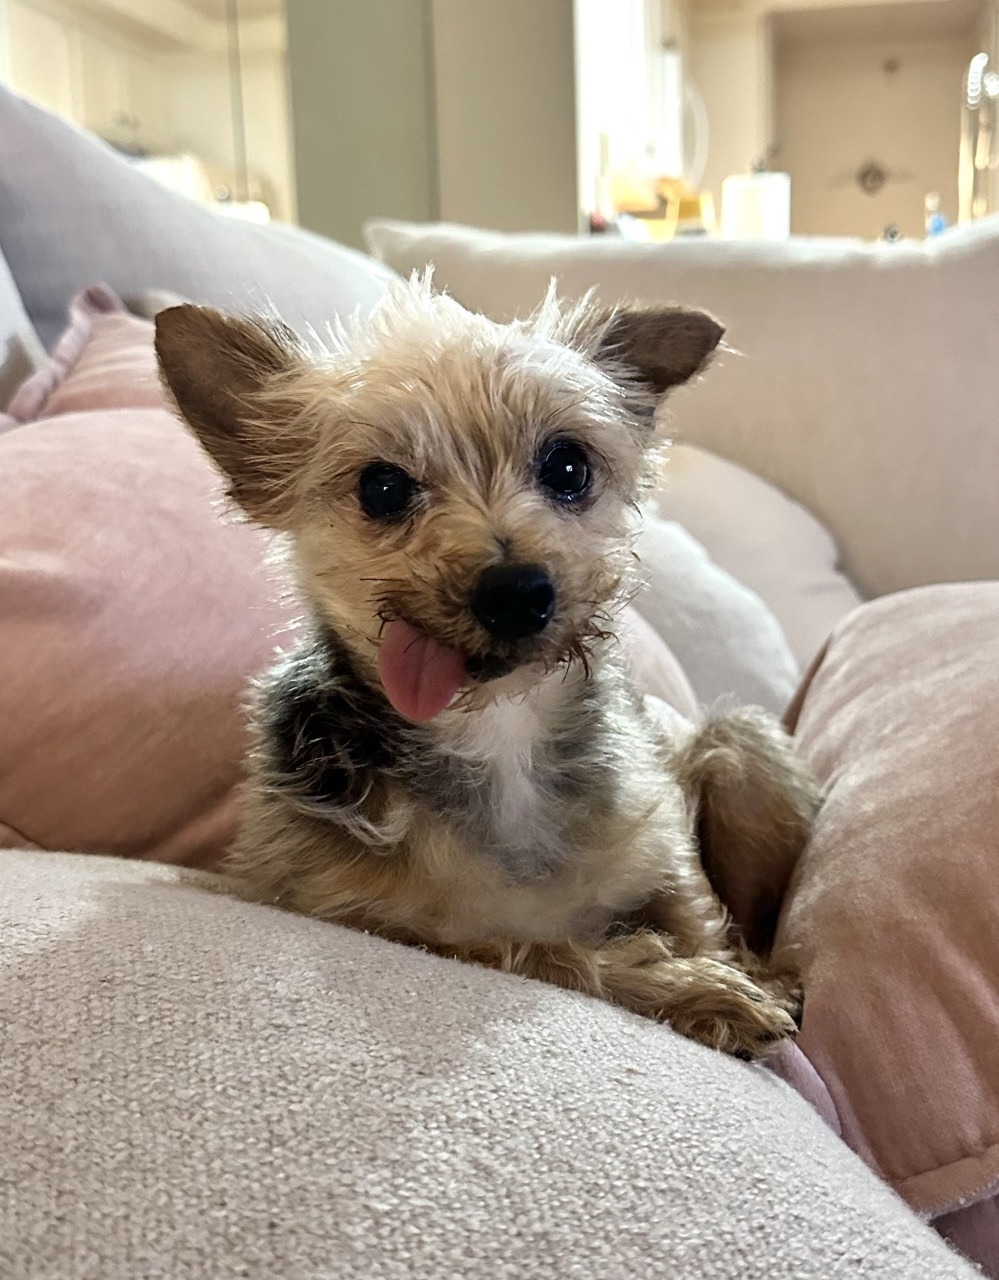 A yorkie with his tongue sticking out on the couch